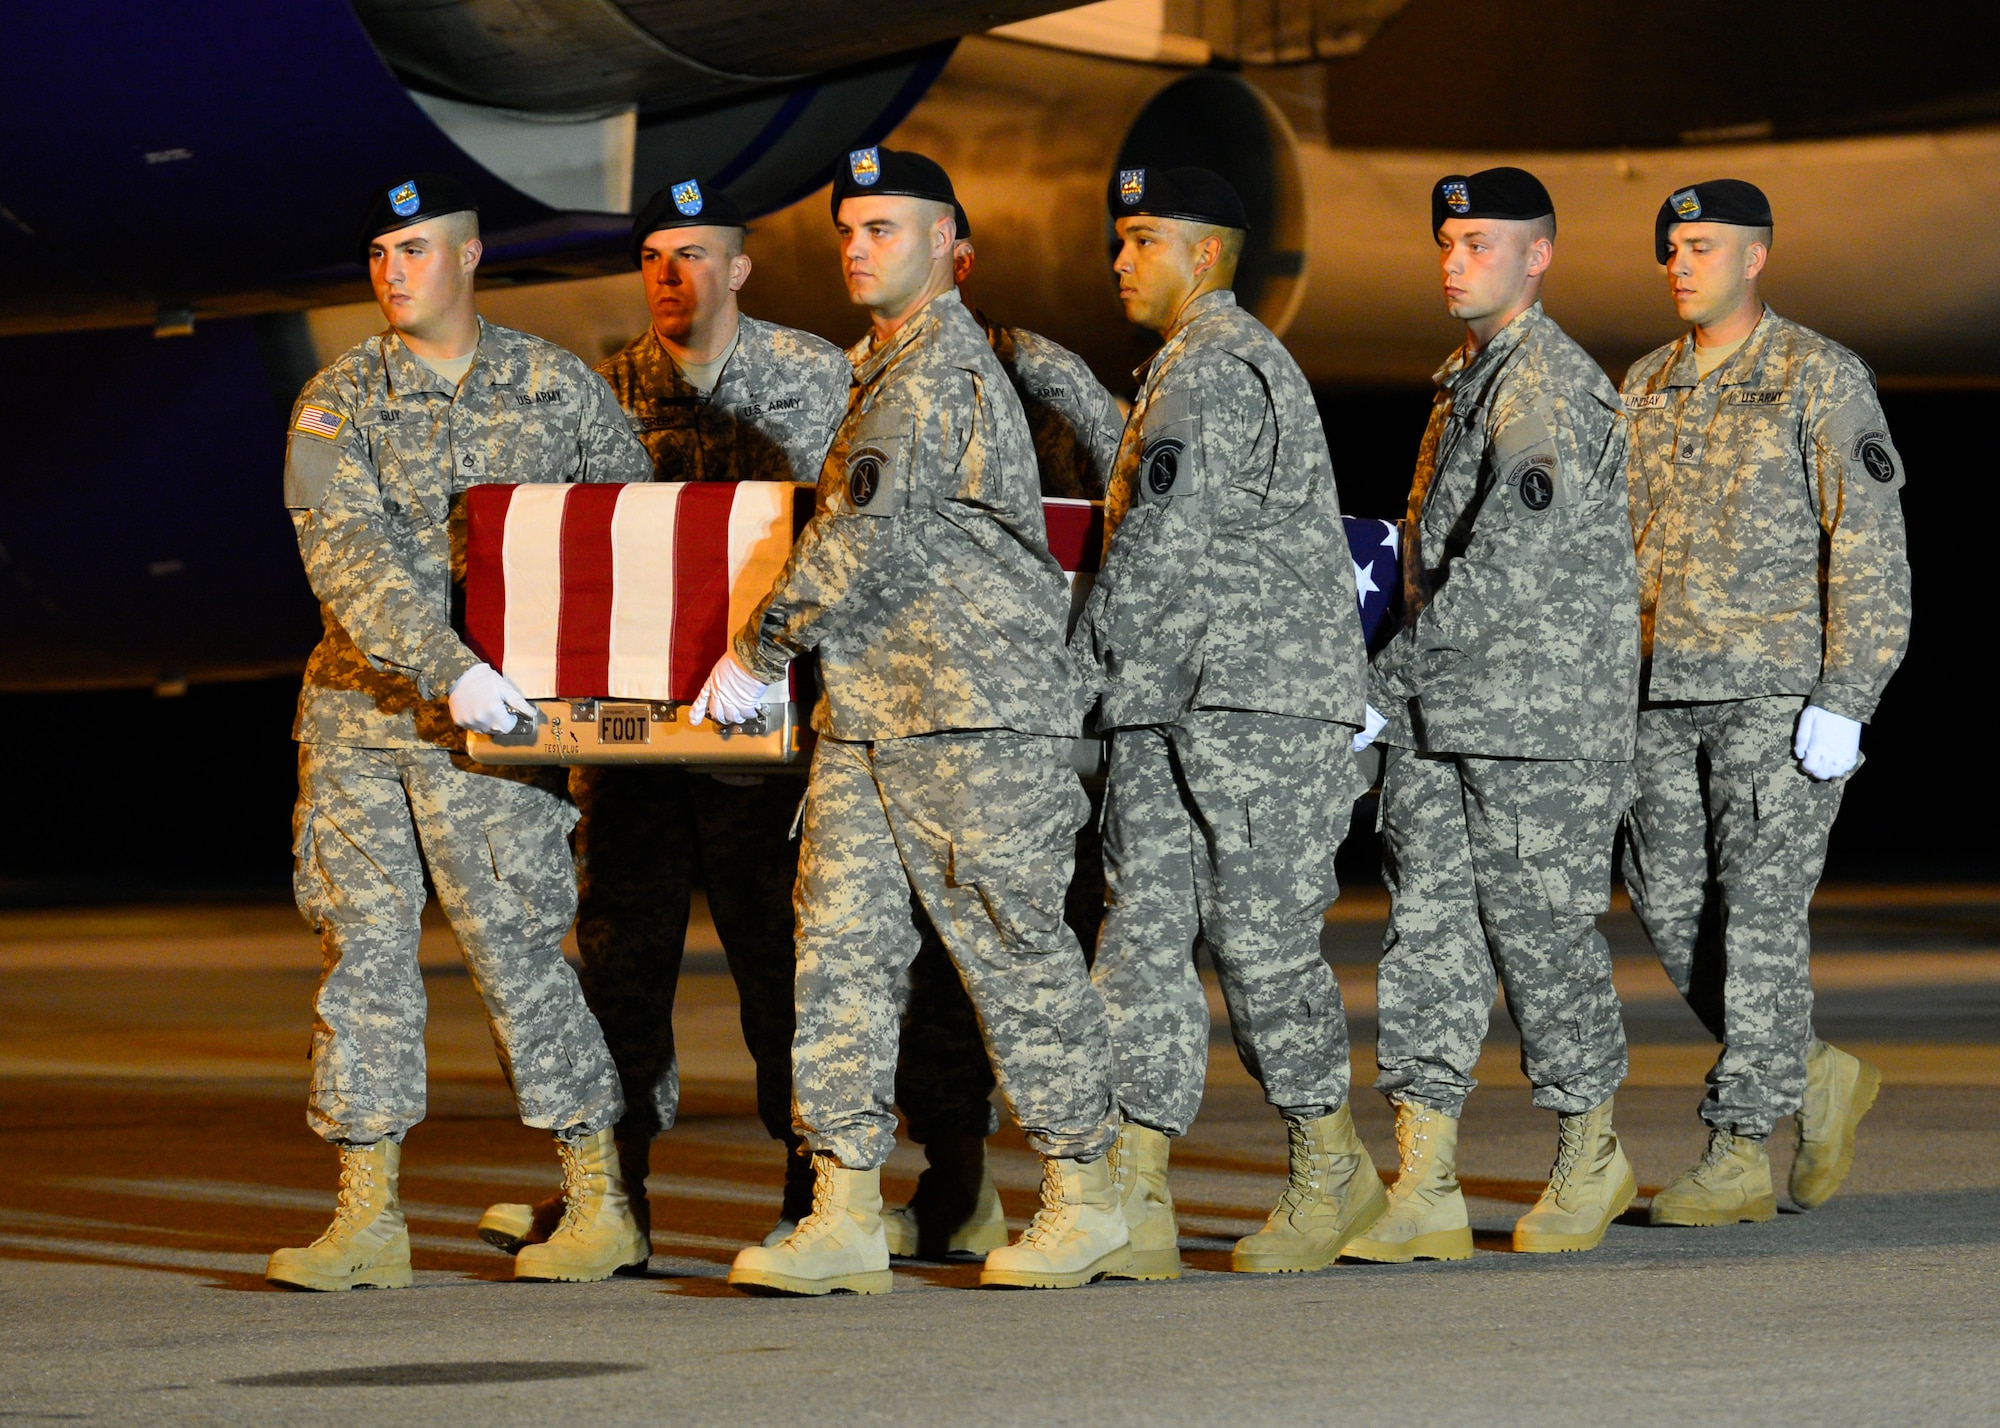 A U.S. Army carry team transfers the remains of Army Maj. Michael J. Donahue of Columbus, Ohio, Sept. 17, 2014, at Dover Air Force Base, Del. Donahue was assigned to the Headquarters and Headquarters Battalion, XVII Airborne Corps, Fort Bragg, N.C. (U.S. Air Force photo/Airman 1st Class William Johnson)